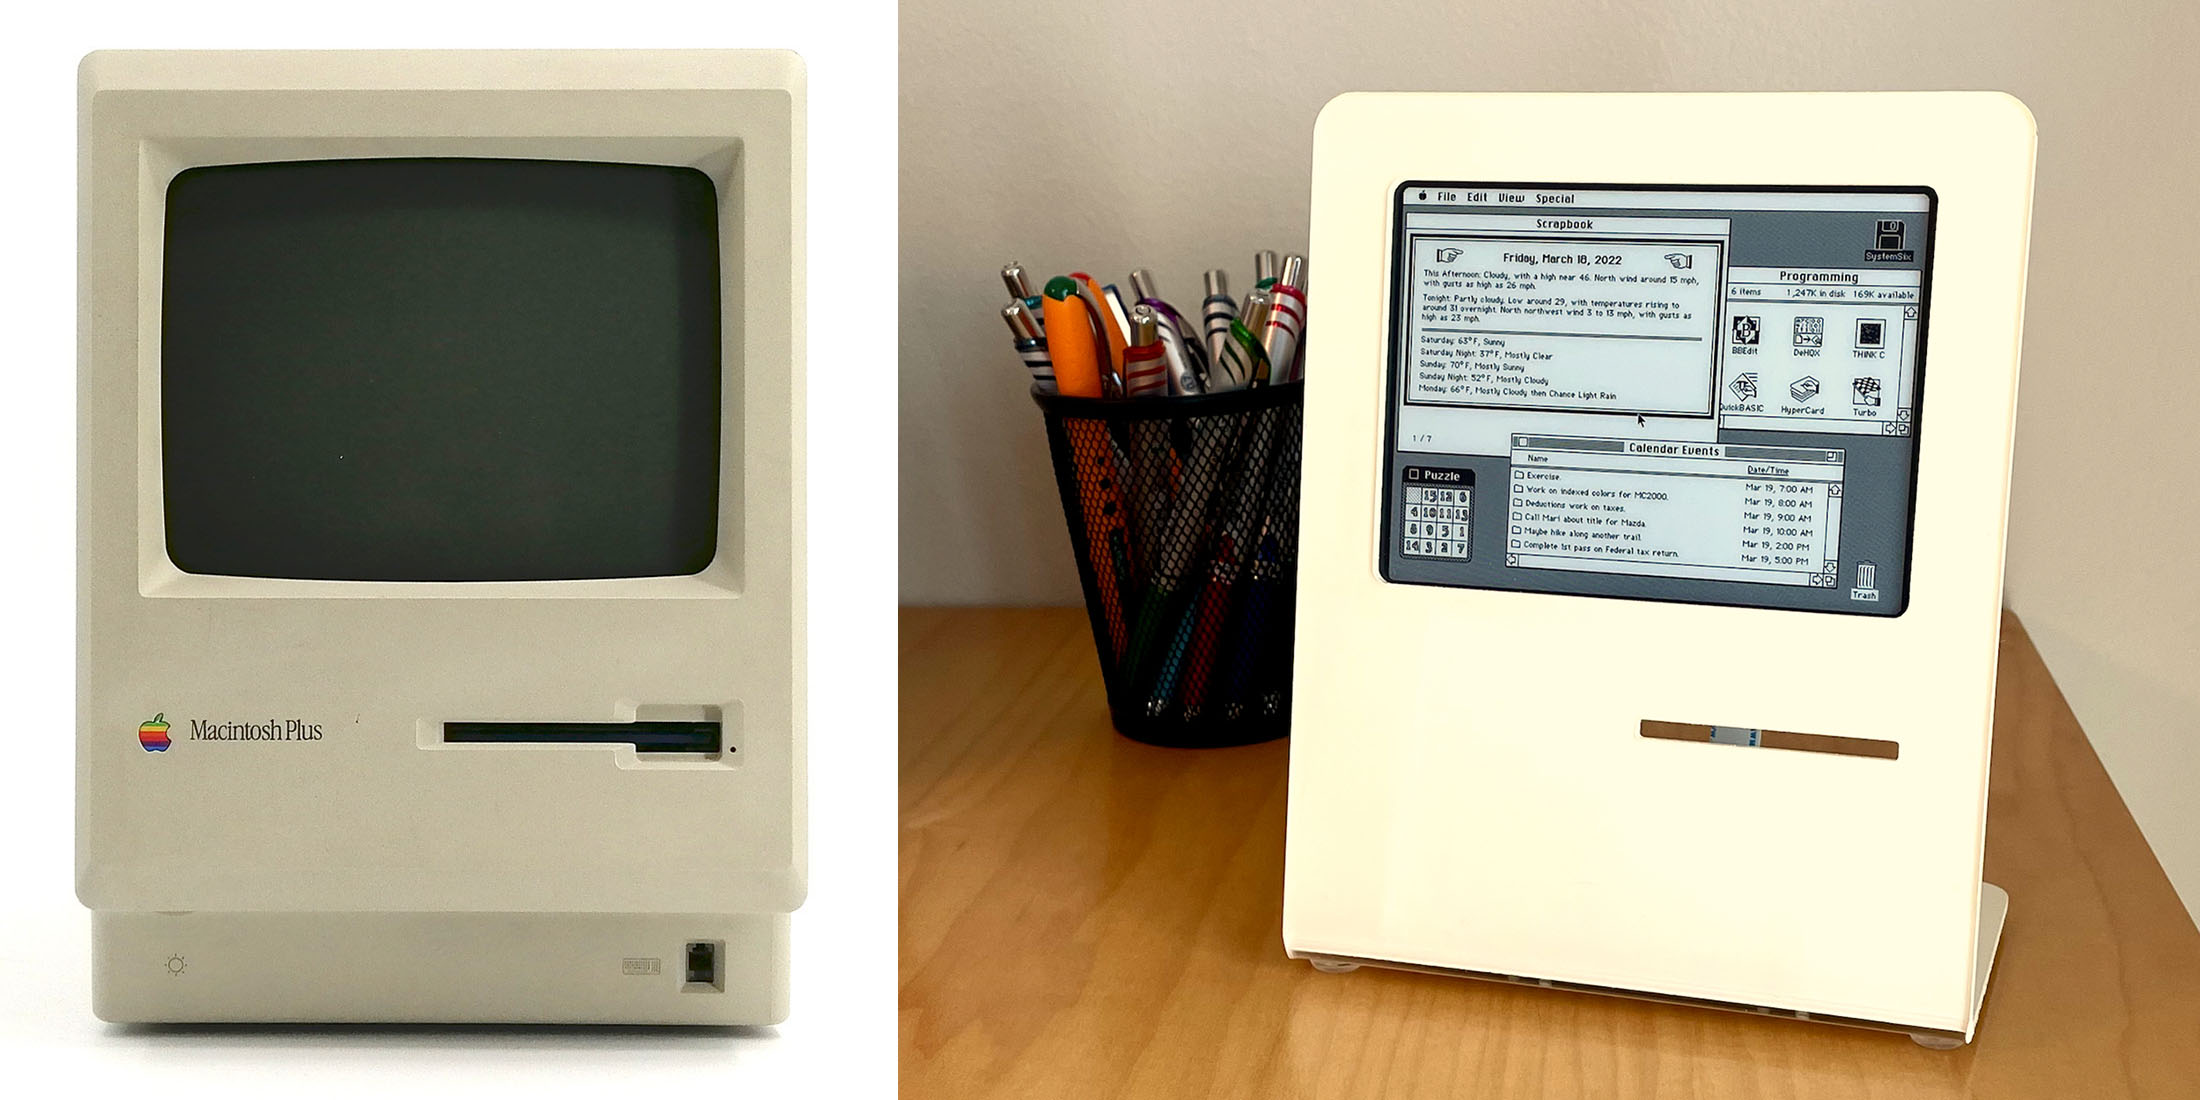 SystemSix is a classic Macintosh emulation with an e-ink display